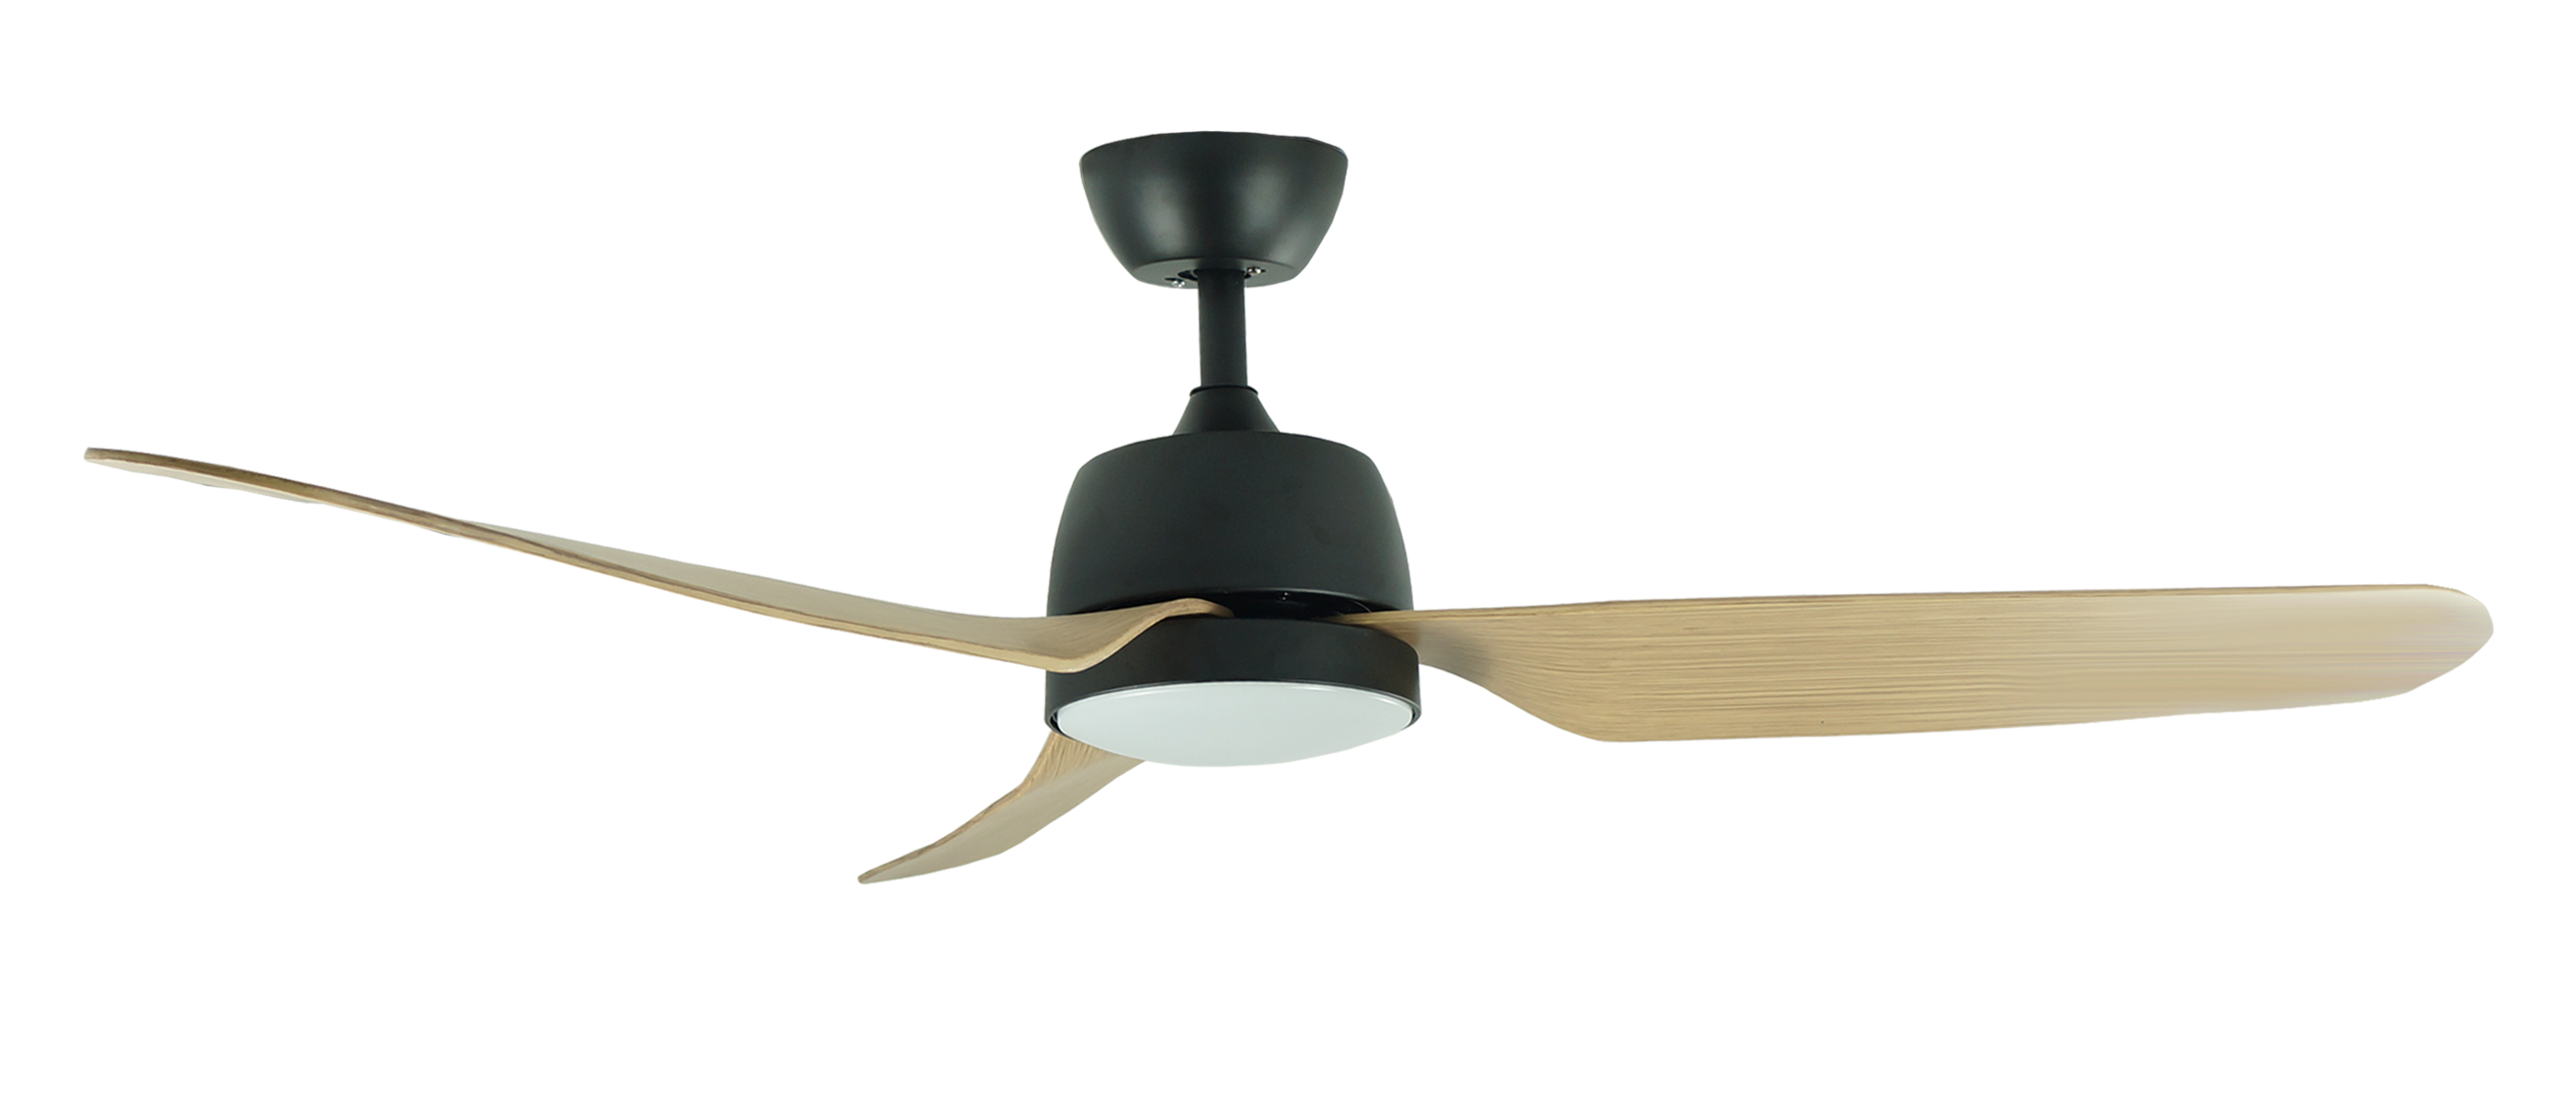 2022 Hotsale Best Price 48inch Ceiling Fan with Lamp And Remote Control